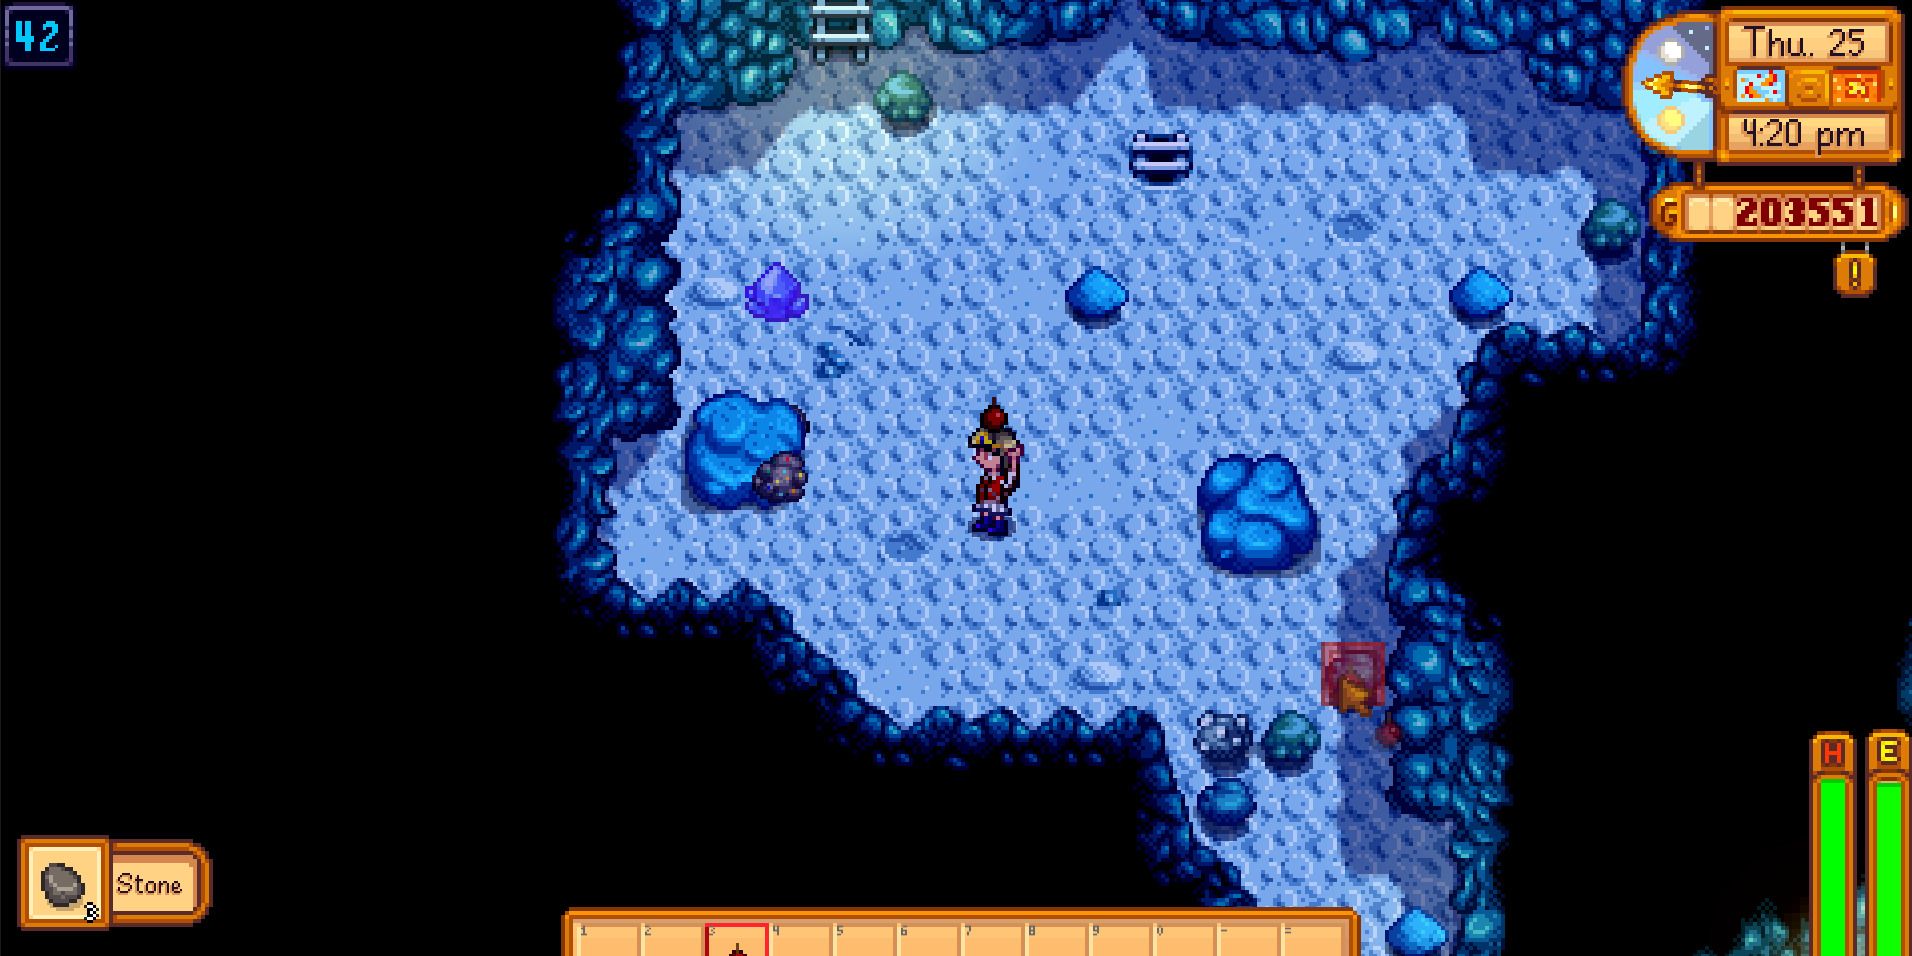 Image of a character finding an Omni Geode in the mines in Stardew Valley